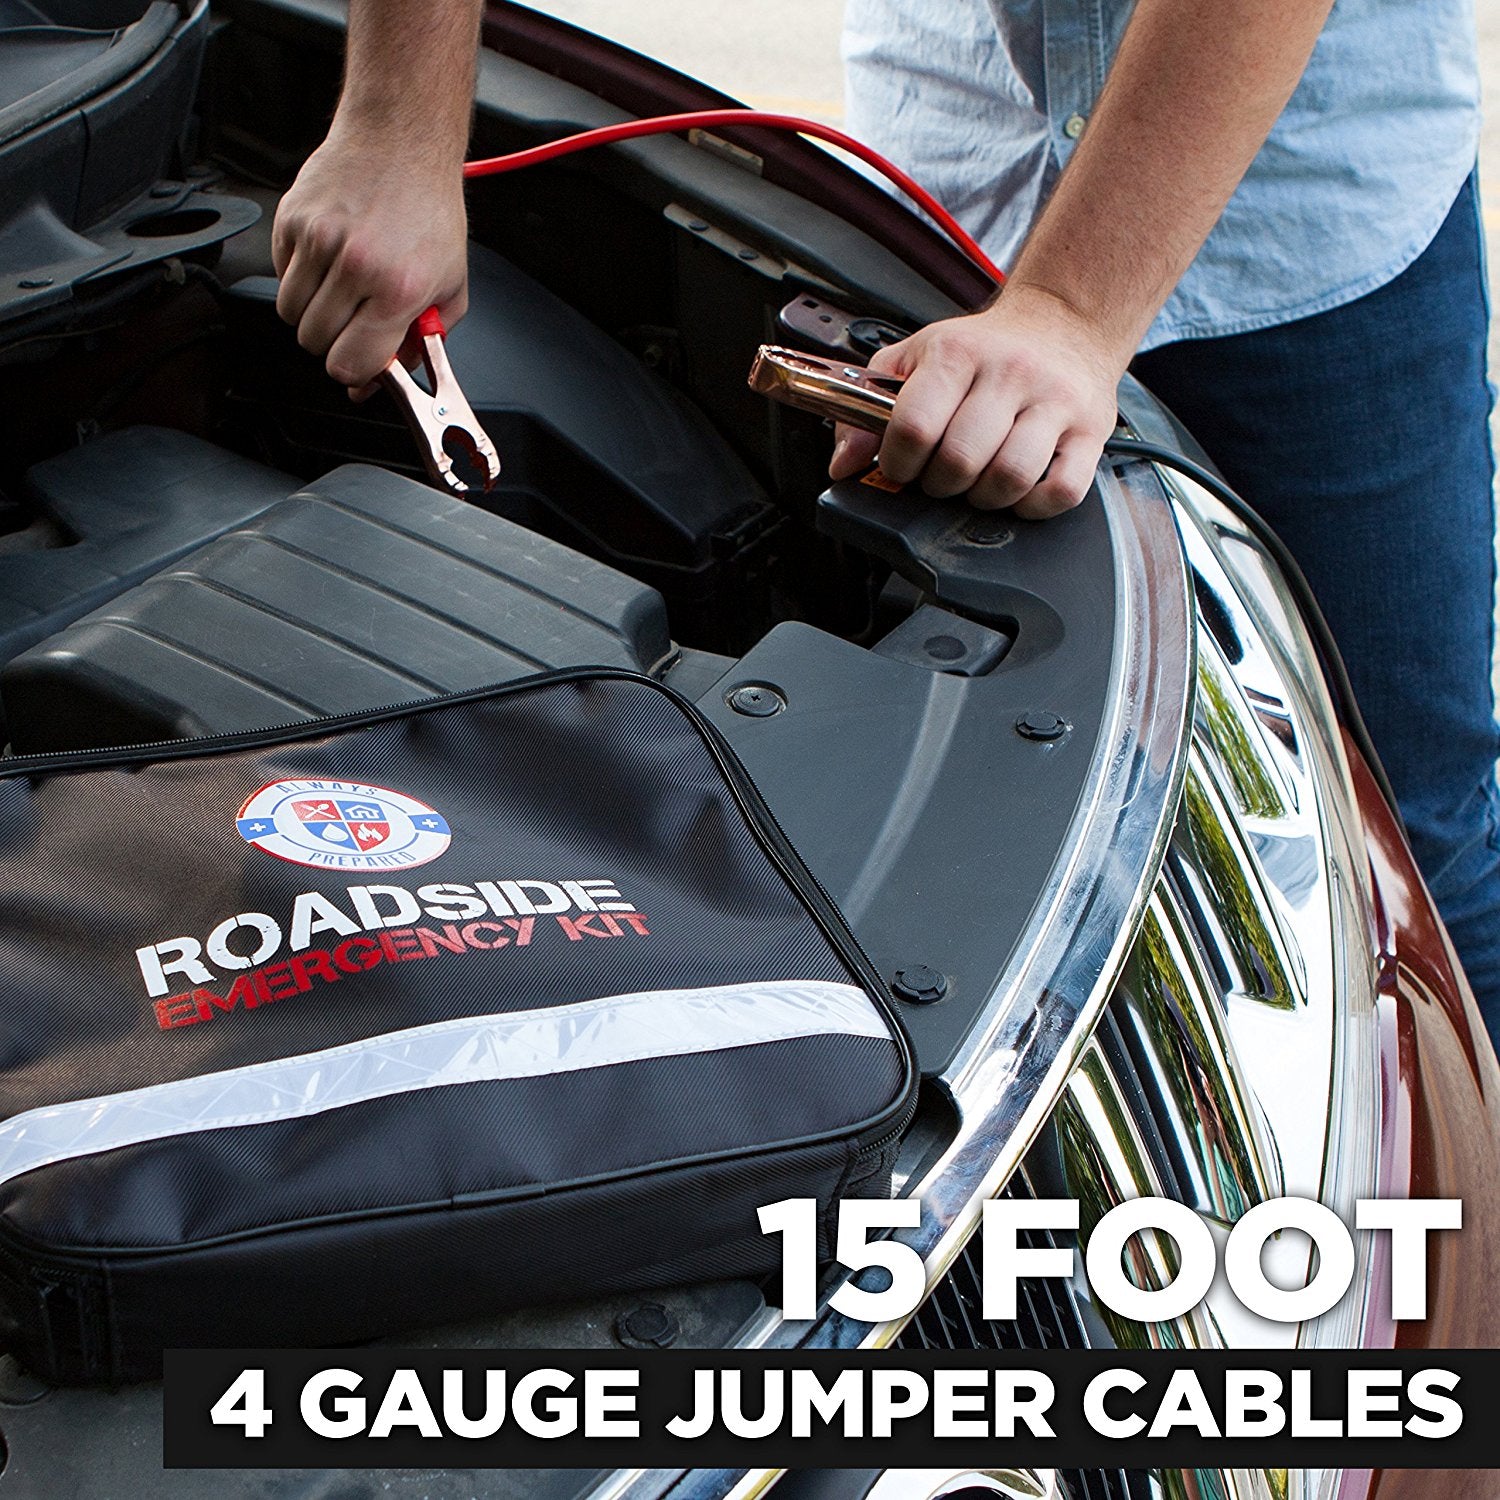 Always Prepared 65-Piece Roadside Assistance Auto Emergency Kit with Jumper Cables